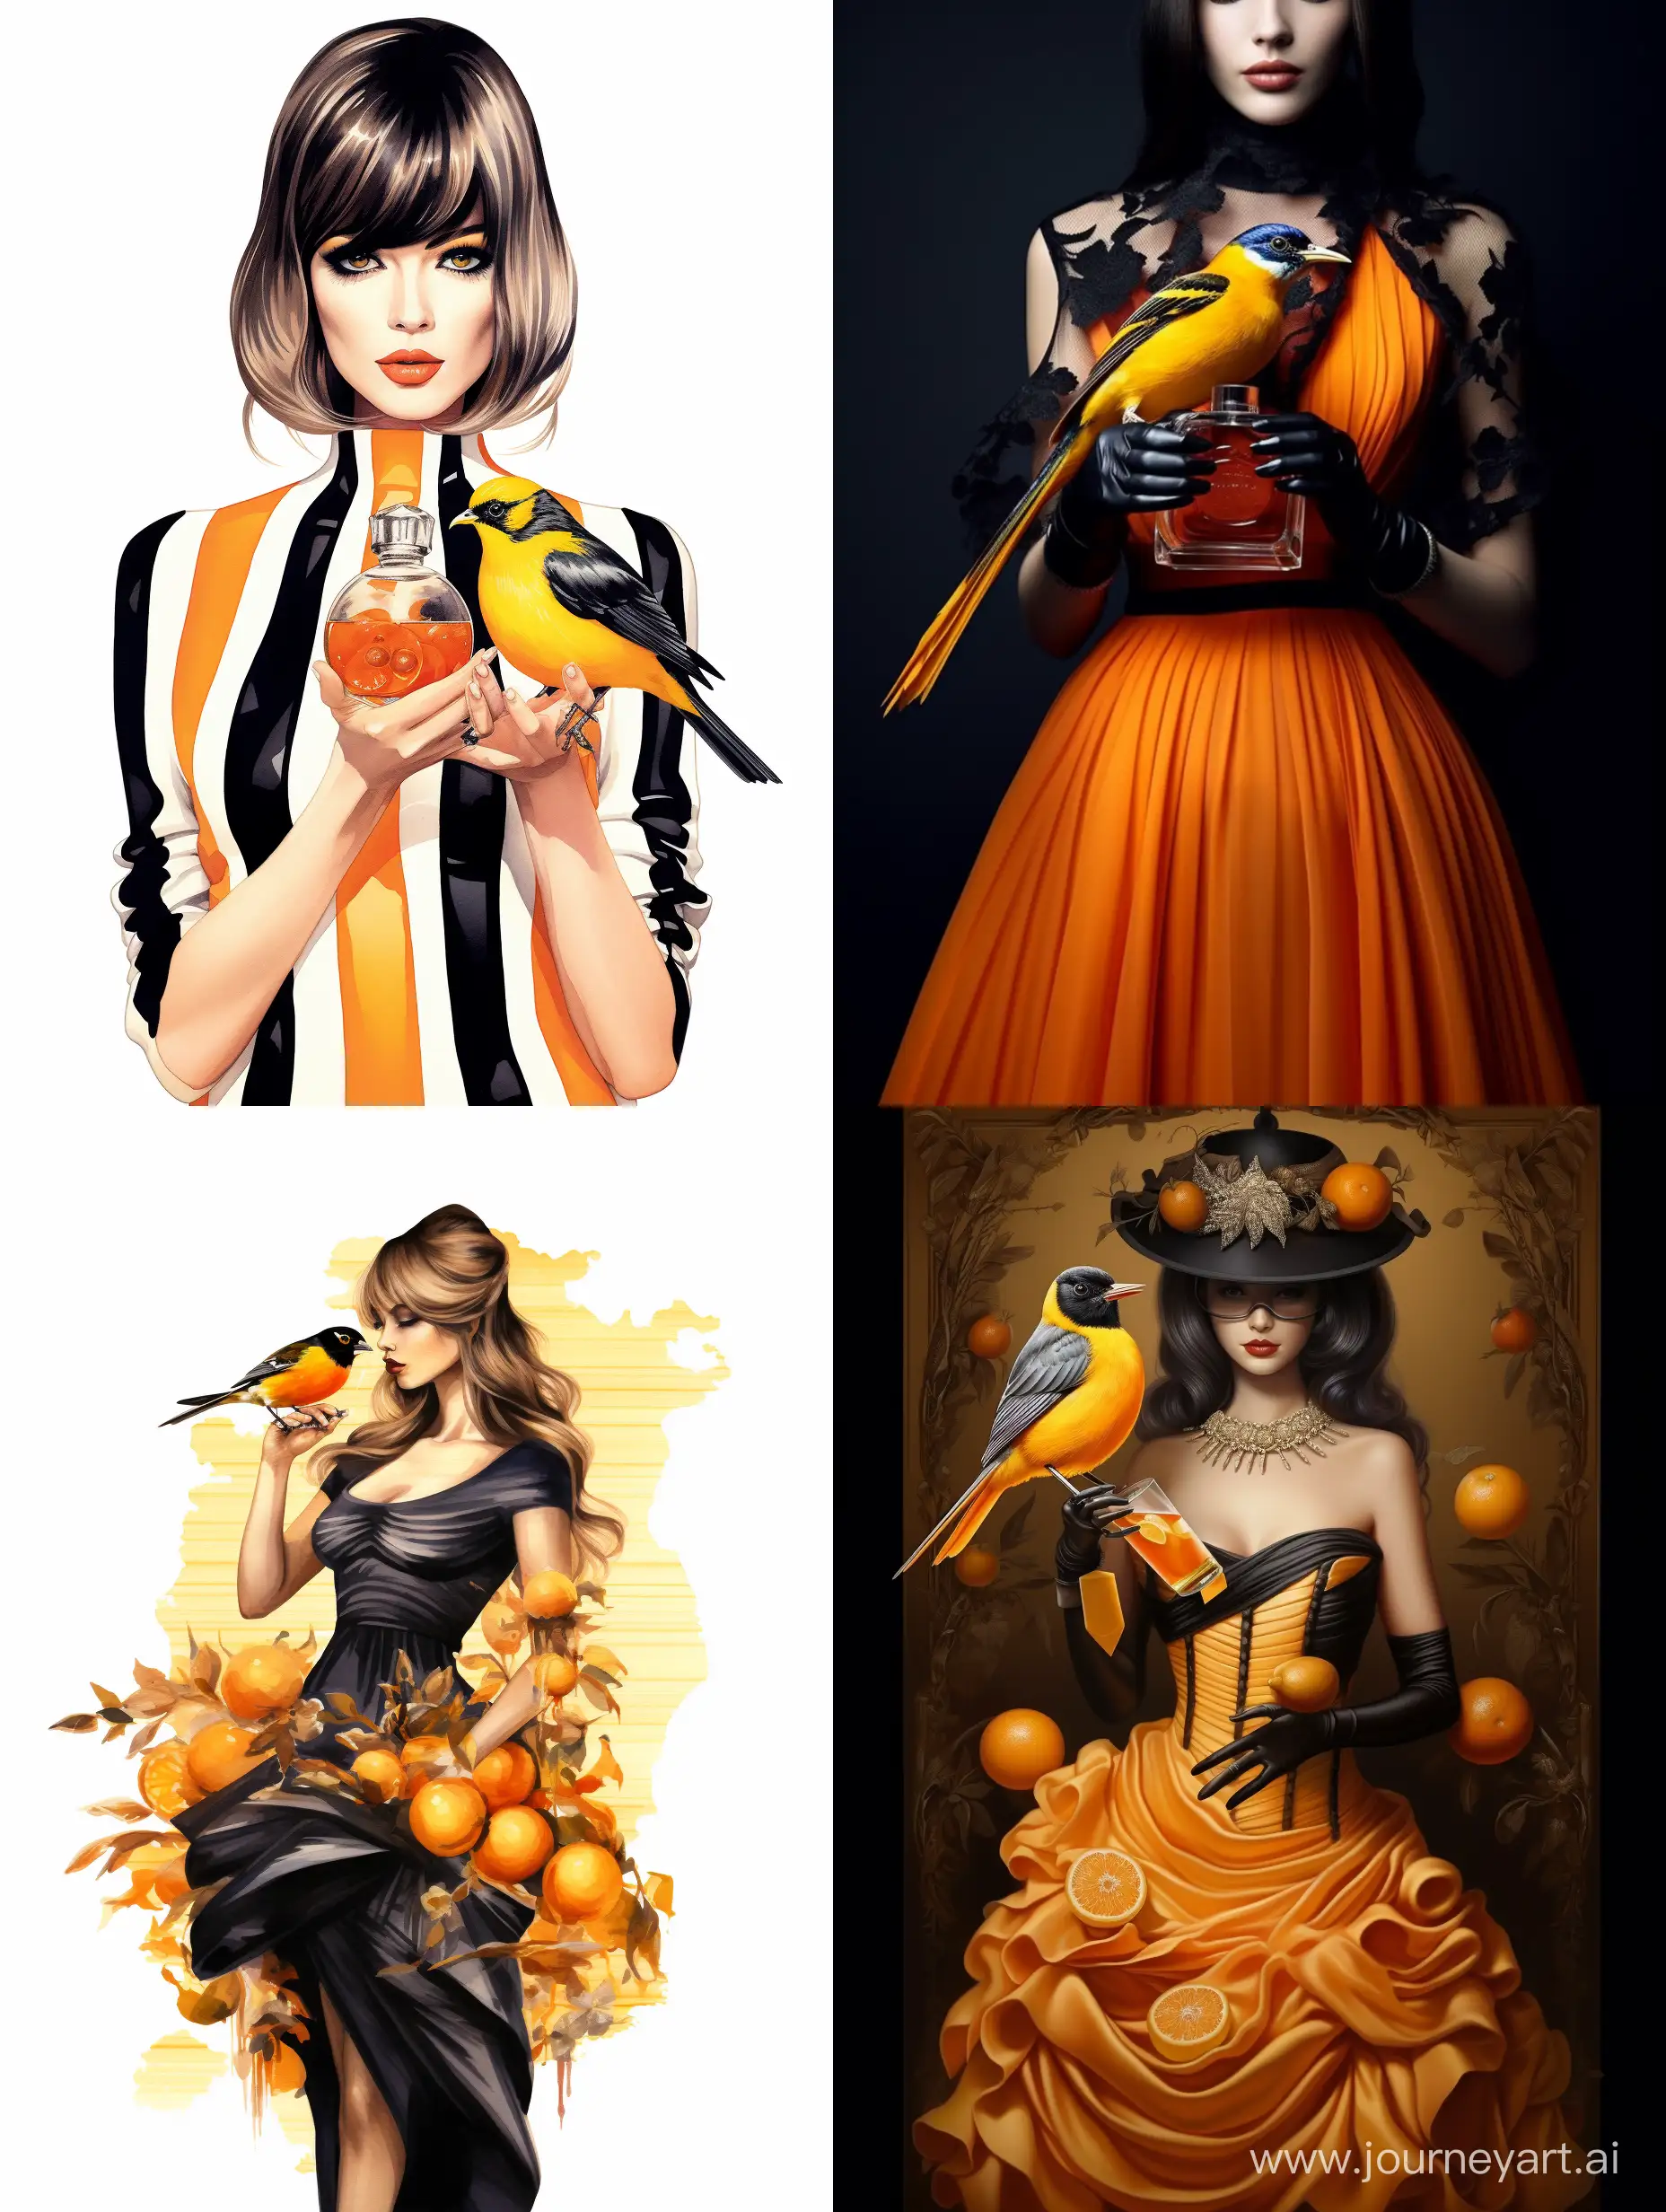 Cool fashion Baltimore oriole bird! and holding a beautiful bottle of perfume!!! in her hands